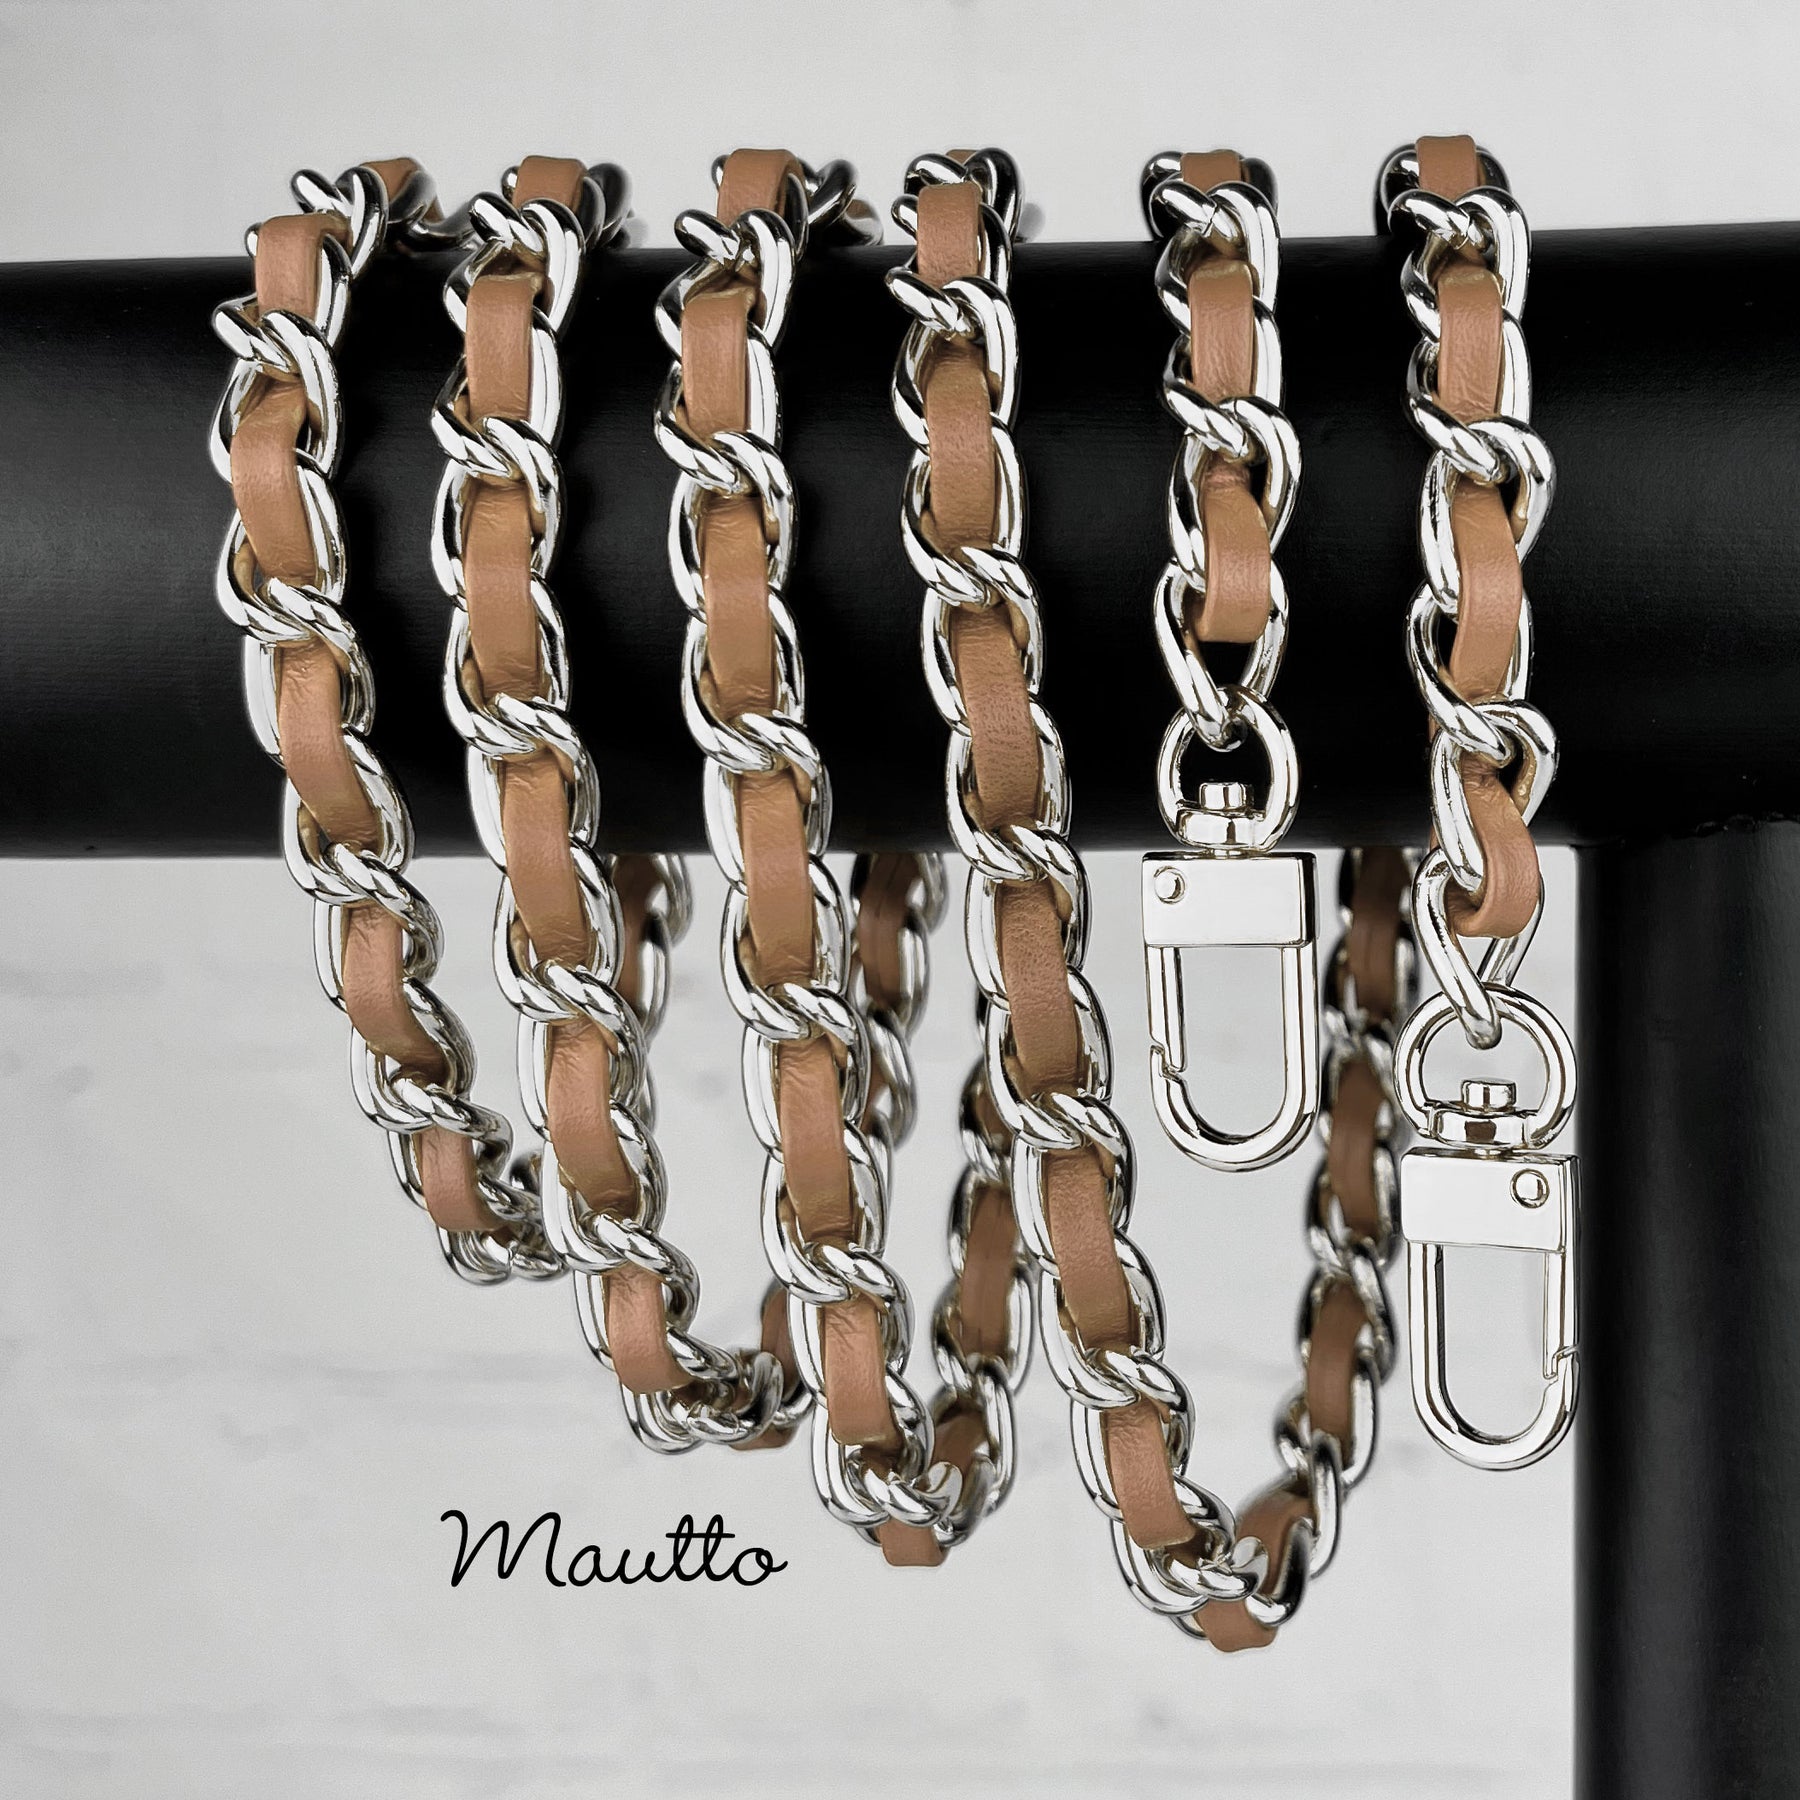 Classic Silver Chain with Leather Woven-in / Tan & Beige Colors – Mautto